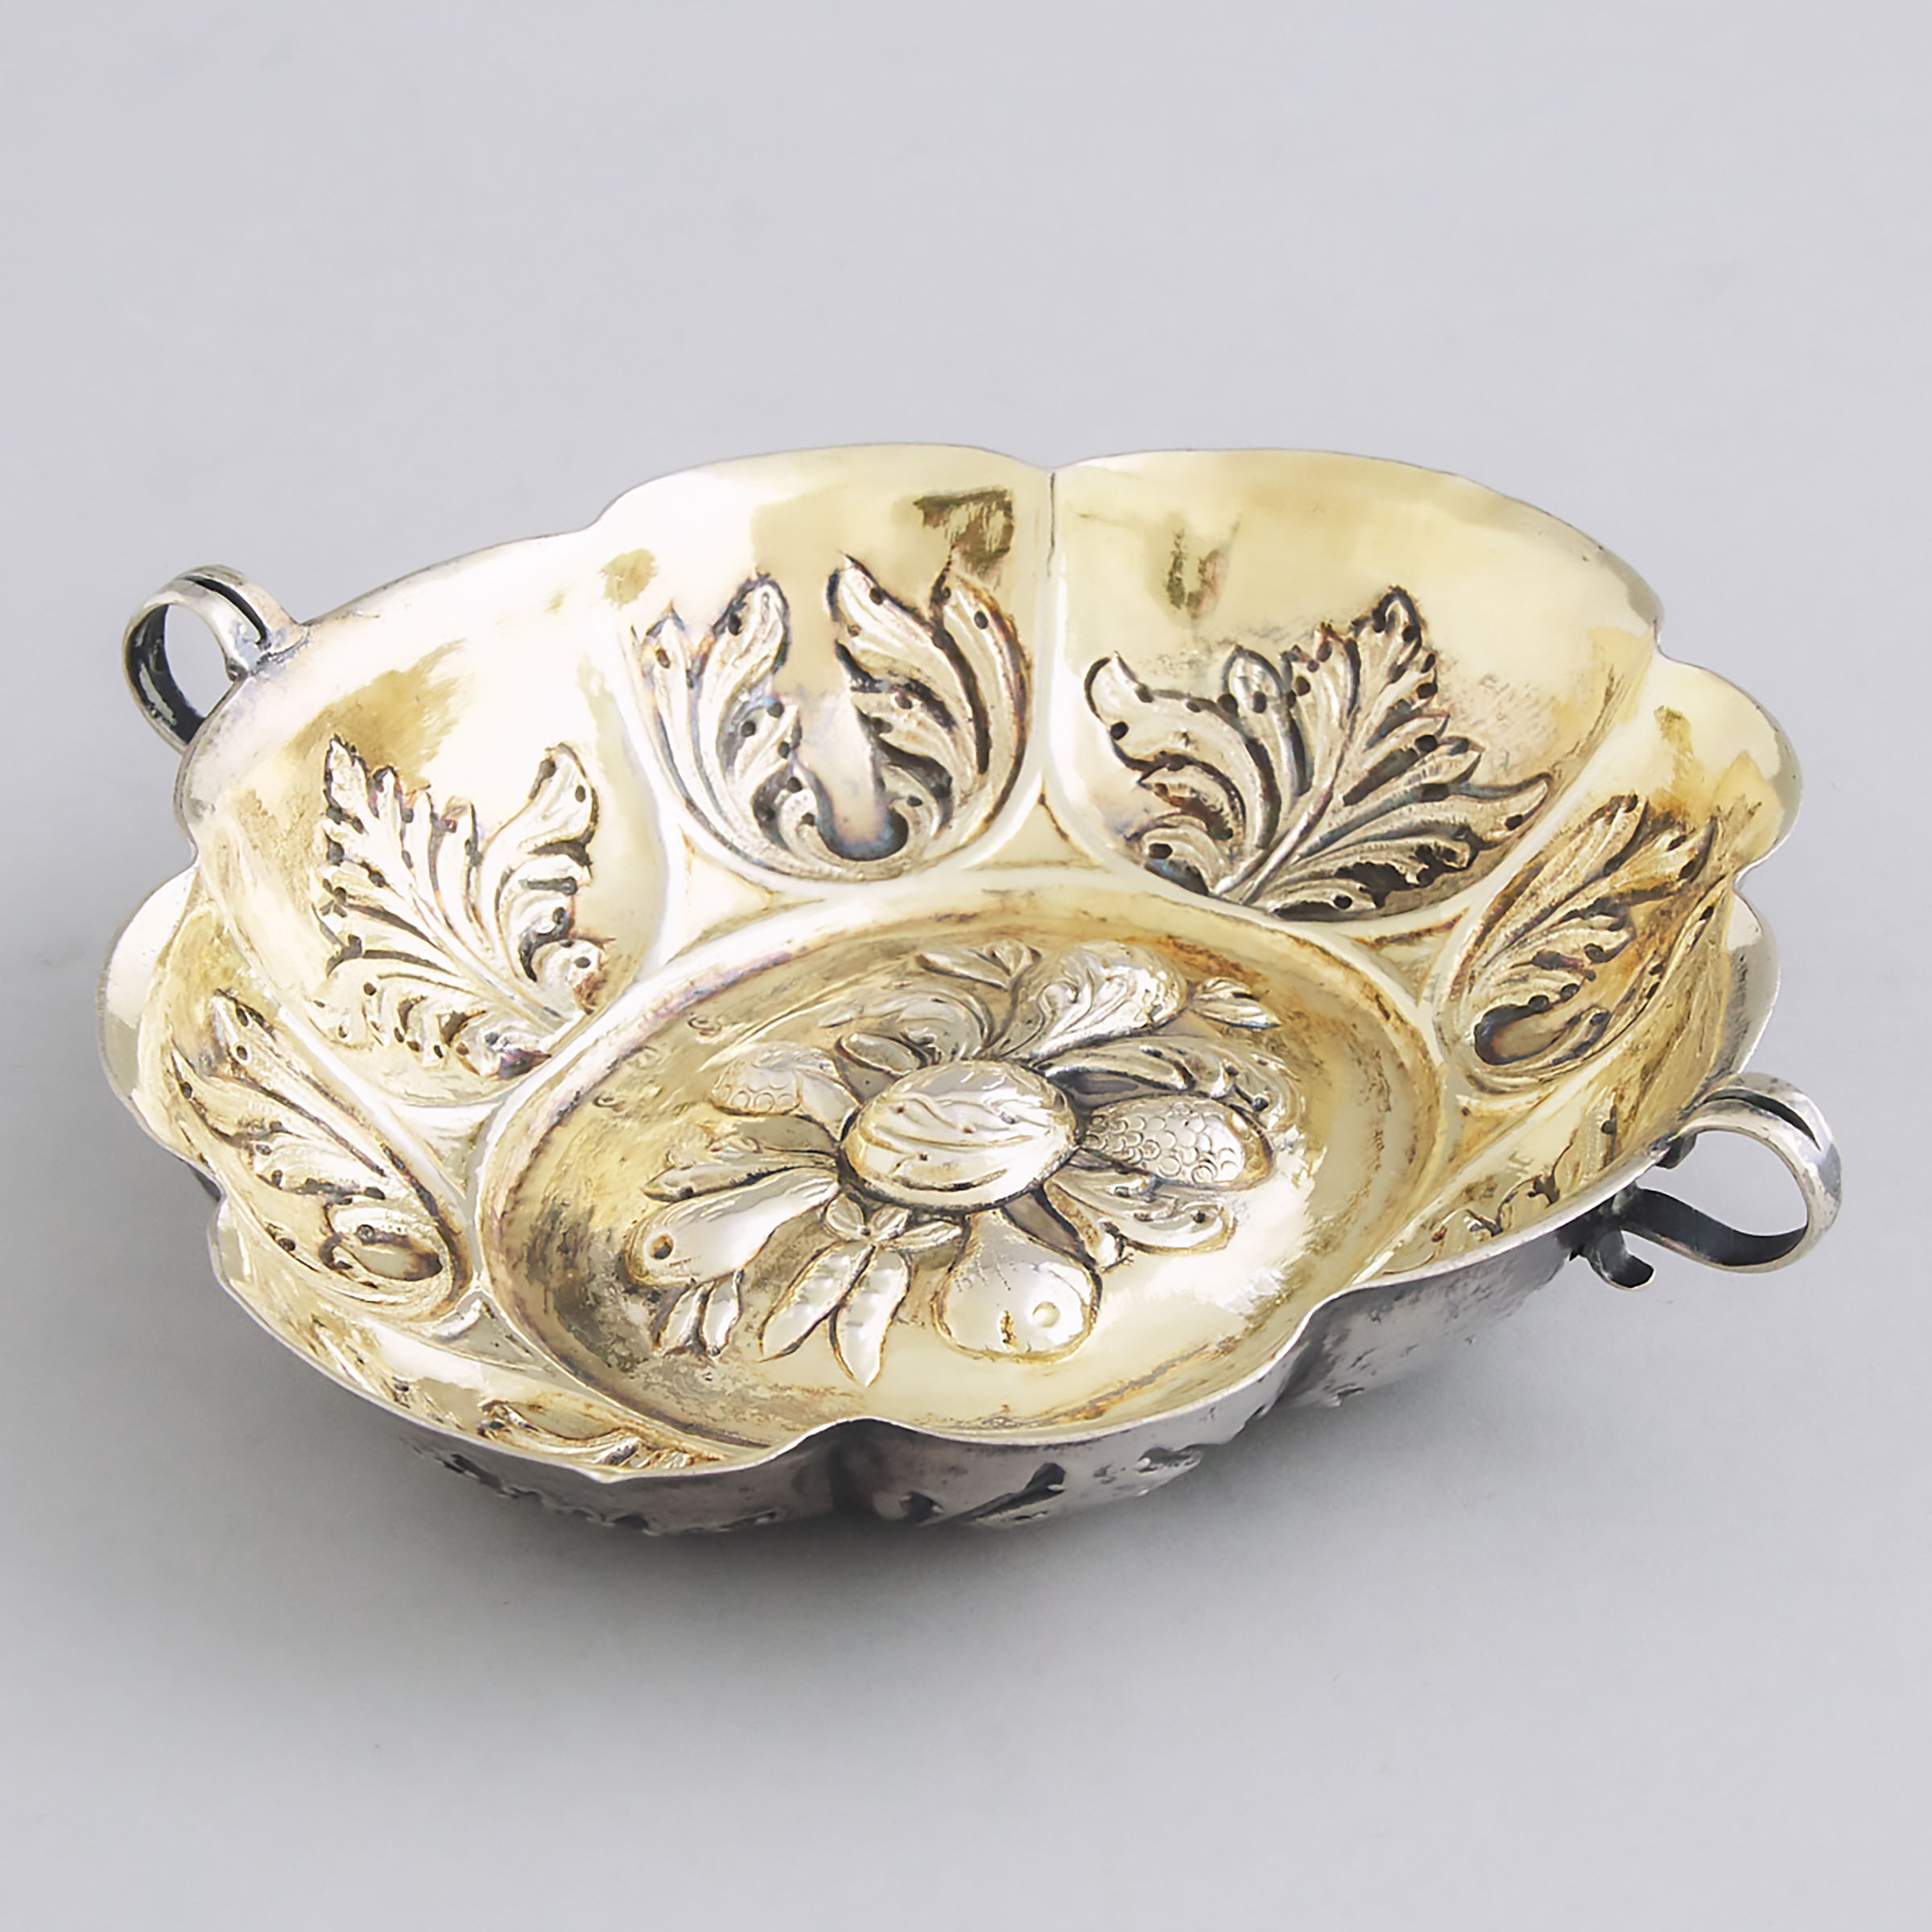 German Silver Parcel-Gilt Two-Handled Lobed Oval Brandy Bowl, early 19th century